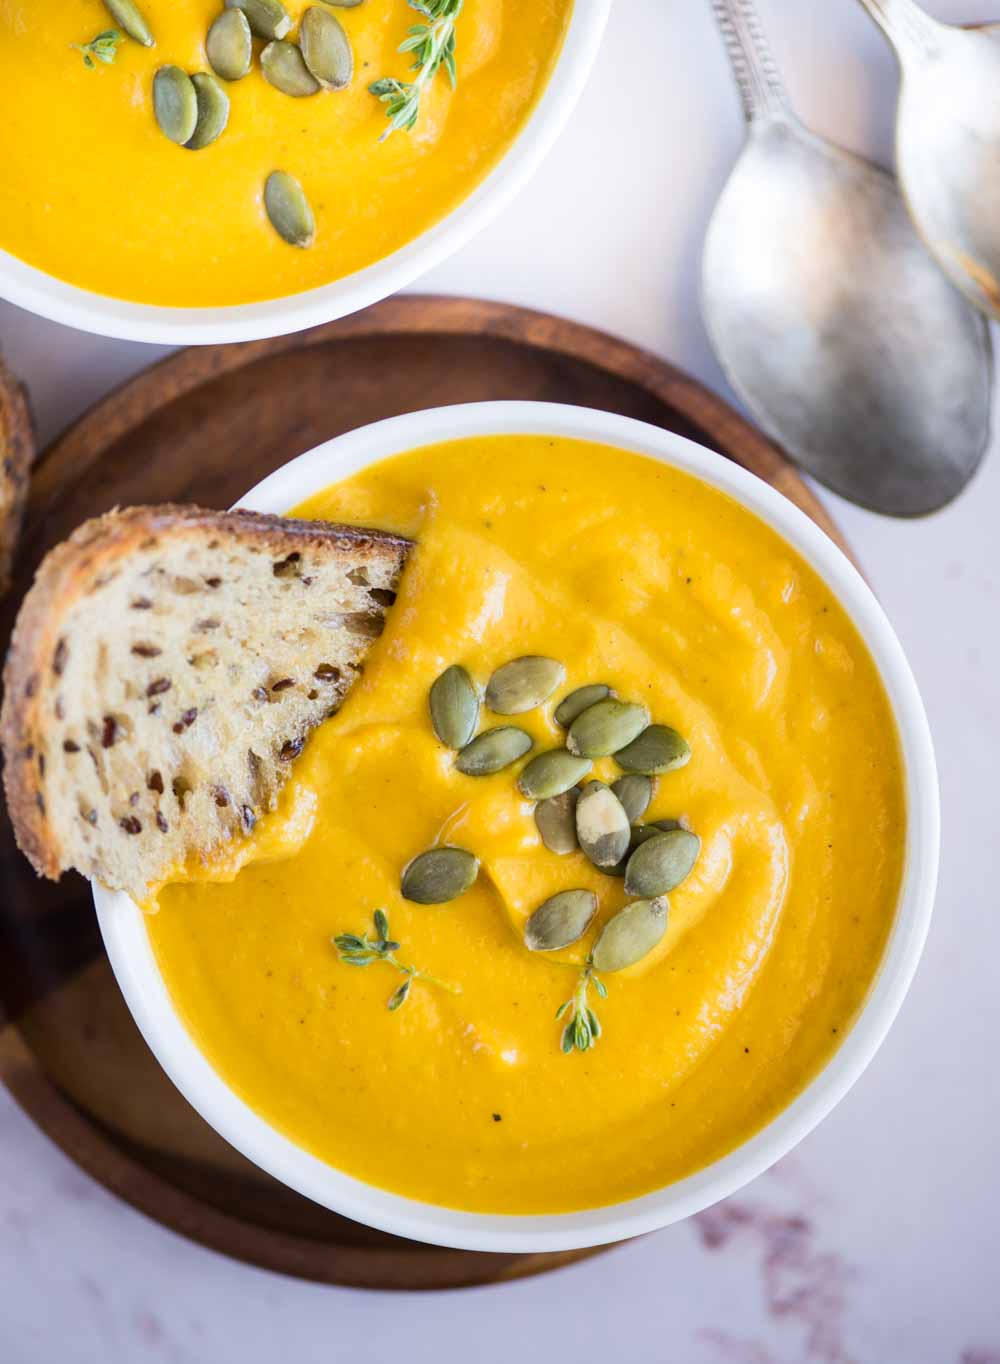 Pumpkin Soup is velvety smooth and creamy without oodles of cream in it. The taste of pumpkin really signs through this healthy soup.